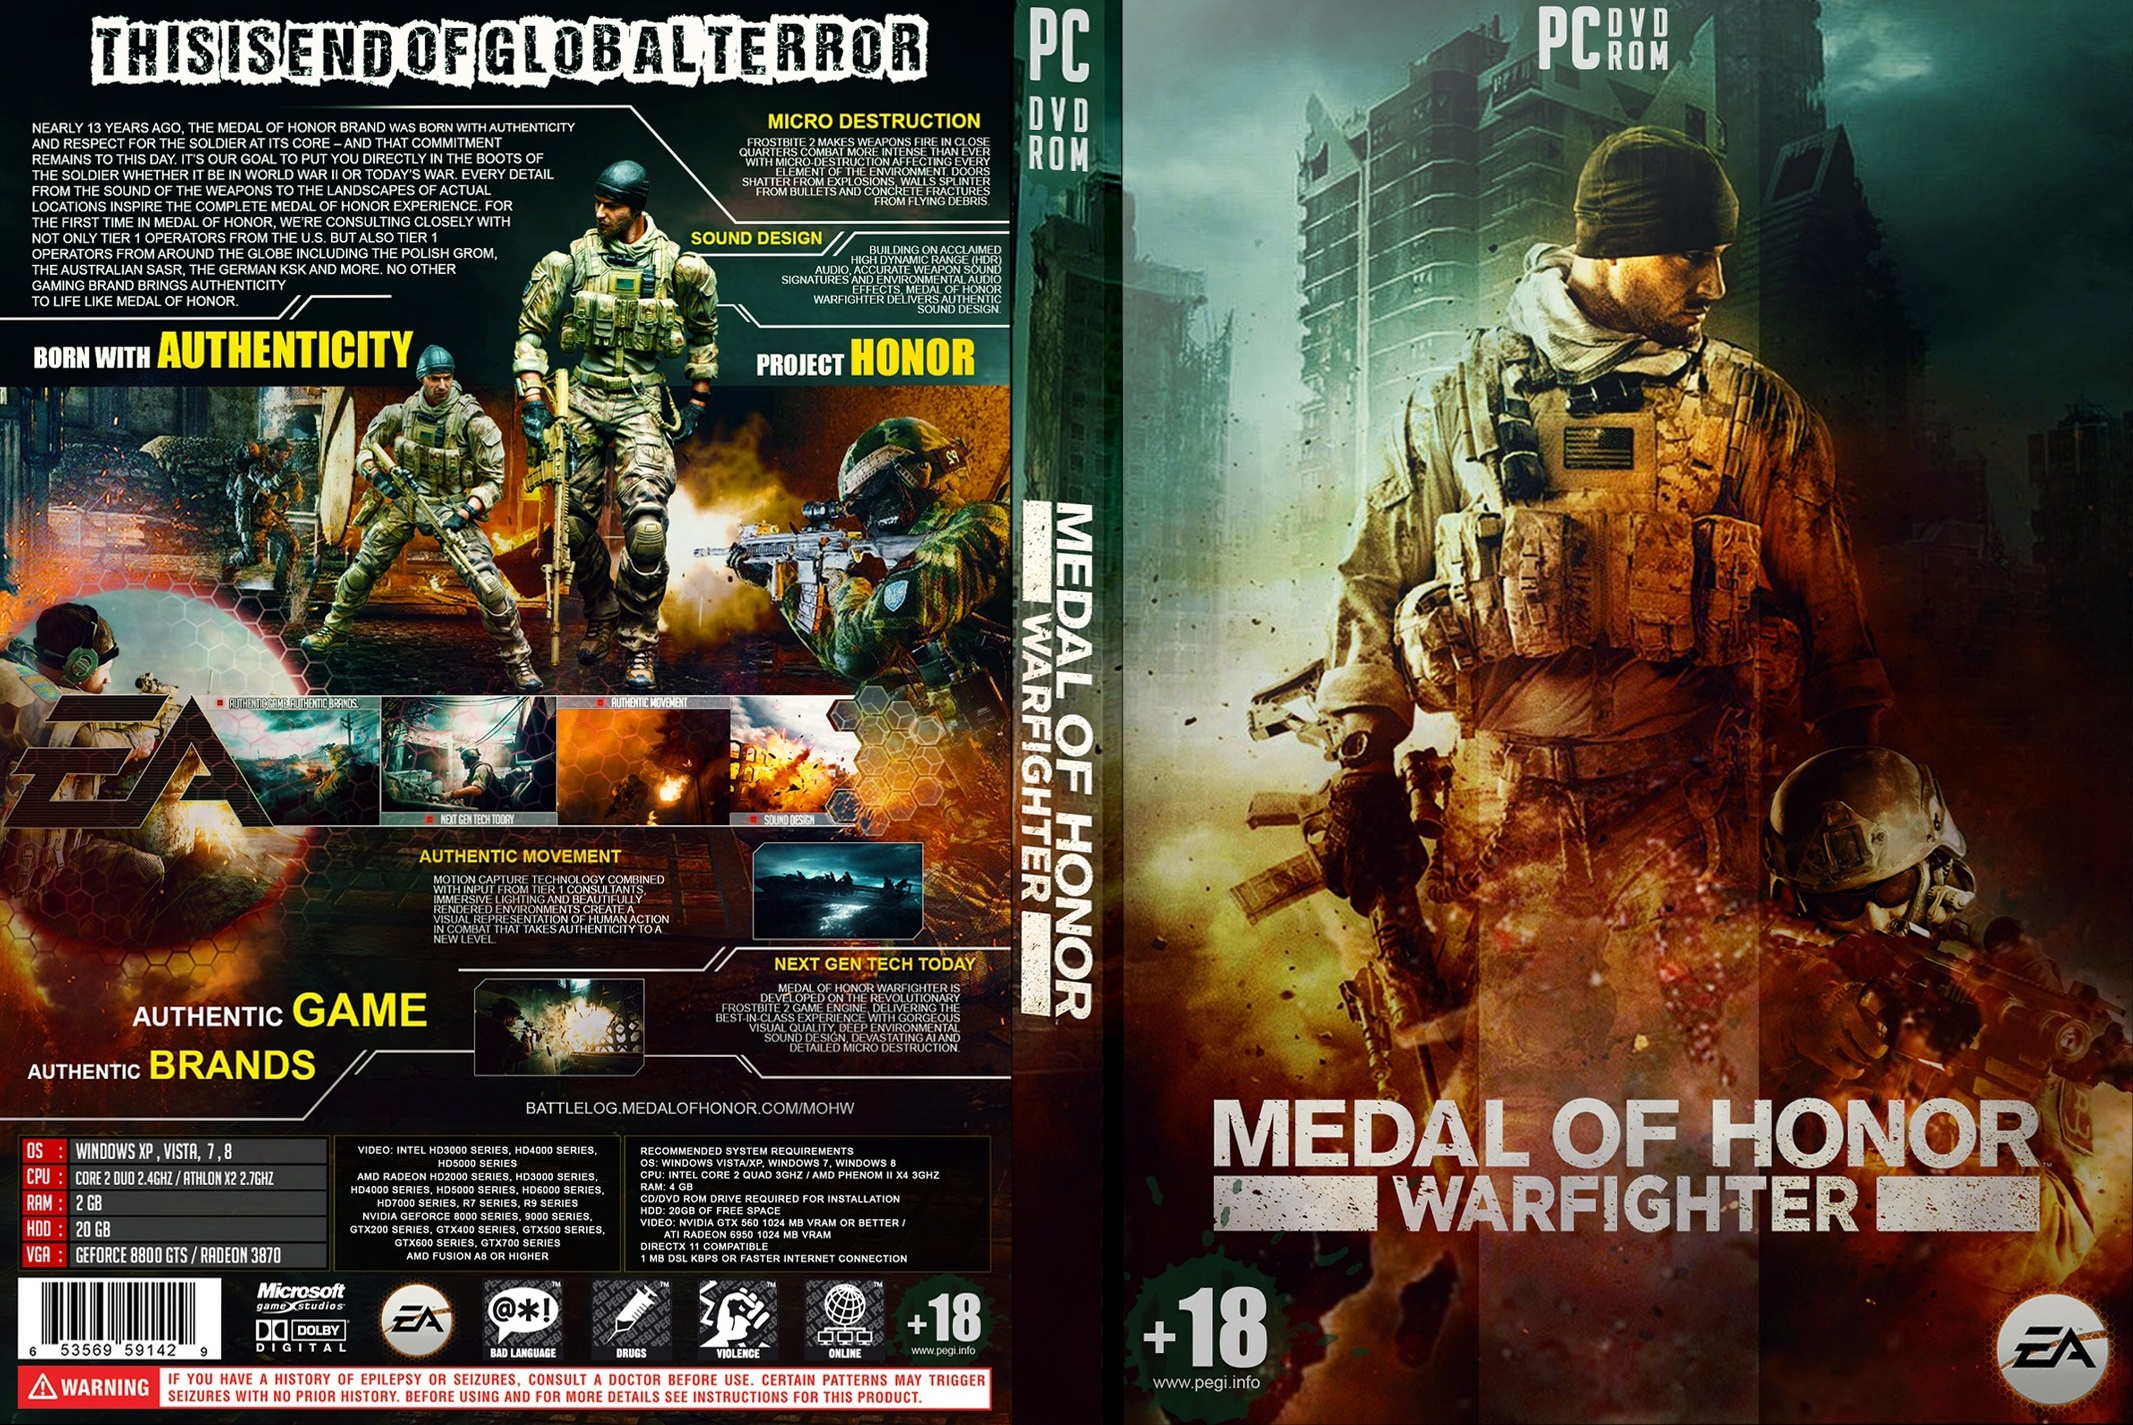 Medal of honor отзывы. Medal of Honor Warfighter ps3. Xbox 360 обложка диска Medal of Honor Warfighter. Medal of Honor Xbox 360 обложка для дисков. Medal of Honor Warfighter ps3 обложка.